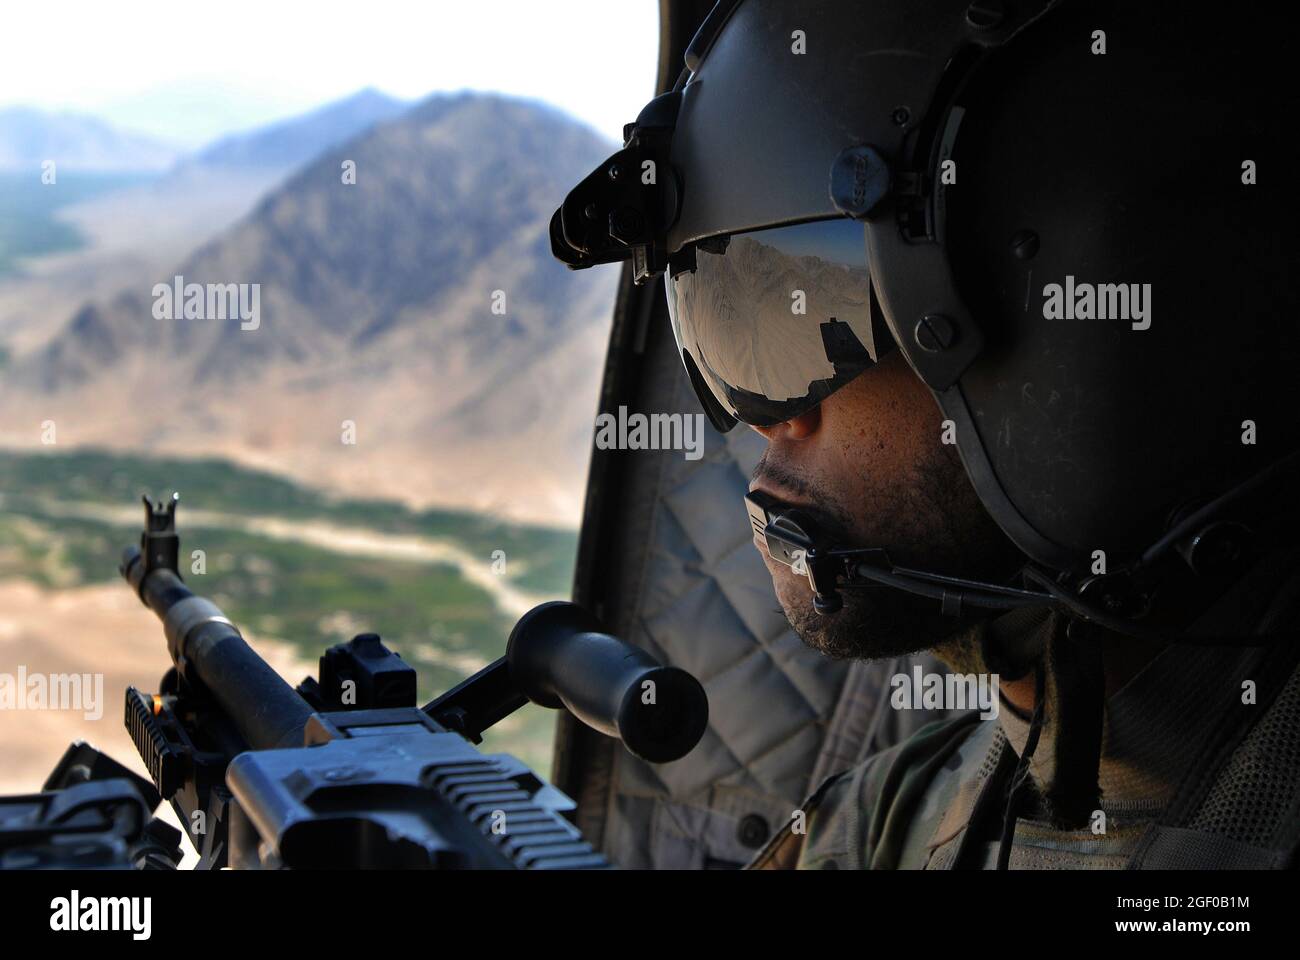 Sgt. Shawn Adams, gunner on a CH-47, keeps watch on the mountains in Uruzgan province, Afghanistan, May 12, 2013. The Chinooks, operated by members of Bravo Company, 2nd Battalion, 104th Aviation Regiment from the Connecticut and Pennsylvania Army National Guard , have played a vital part in the mission in Afghanistan since their arrival in Dec. 2012 by performing resupply, retrograde, and planned missions. (U.S. Army photo by Sgt. Jessi Ann McCormick) Stock Photo